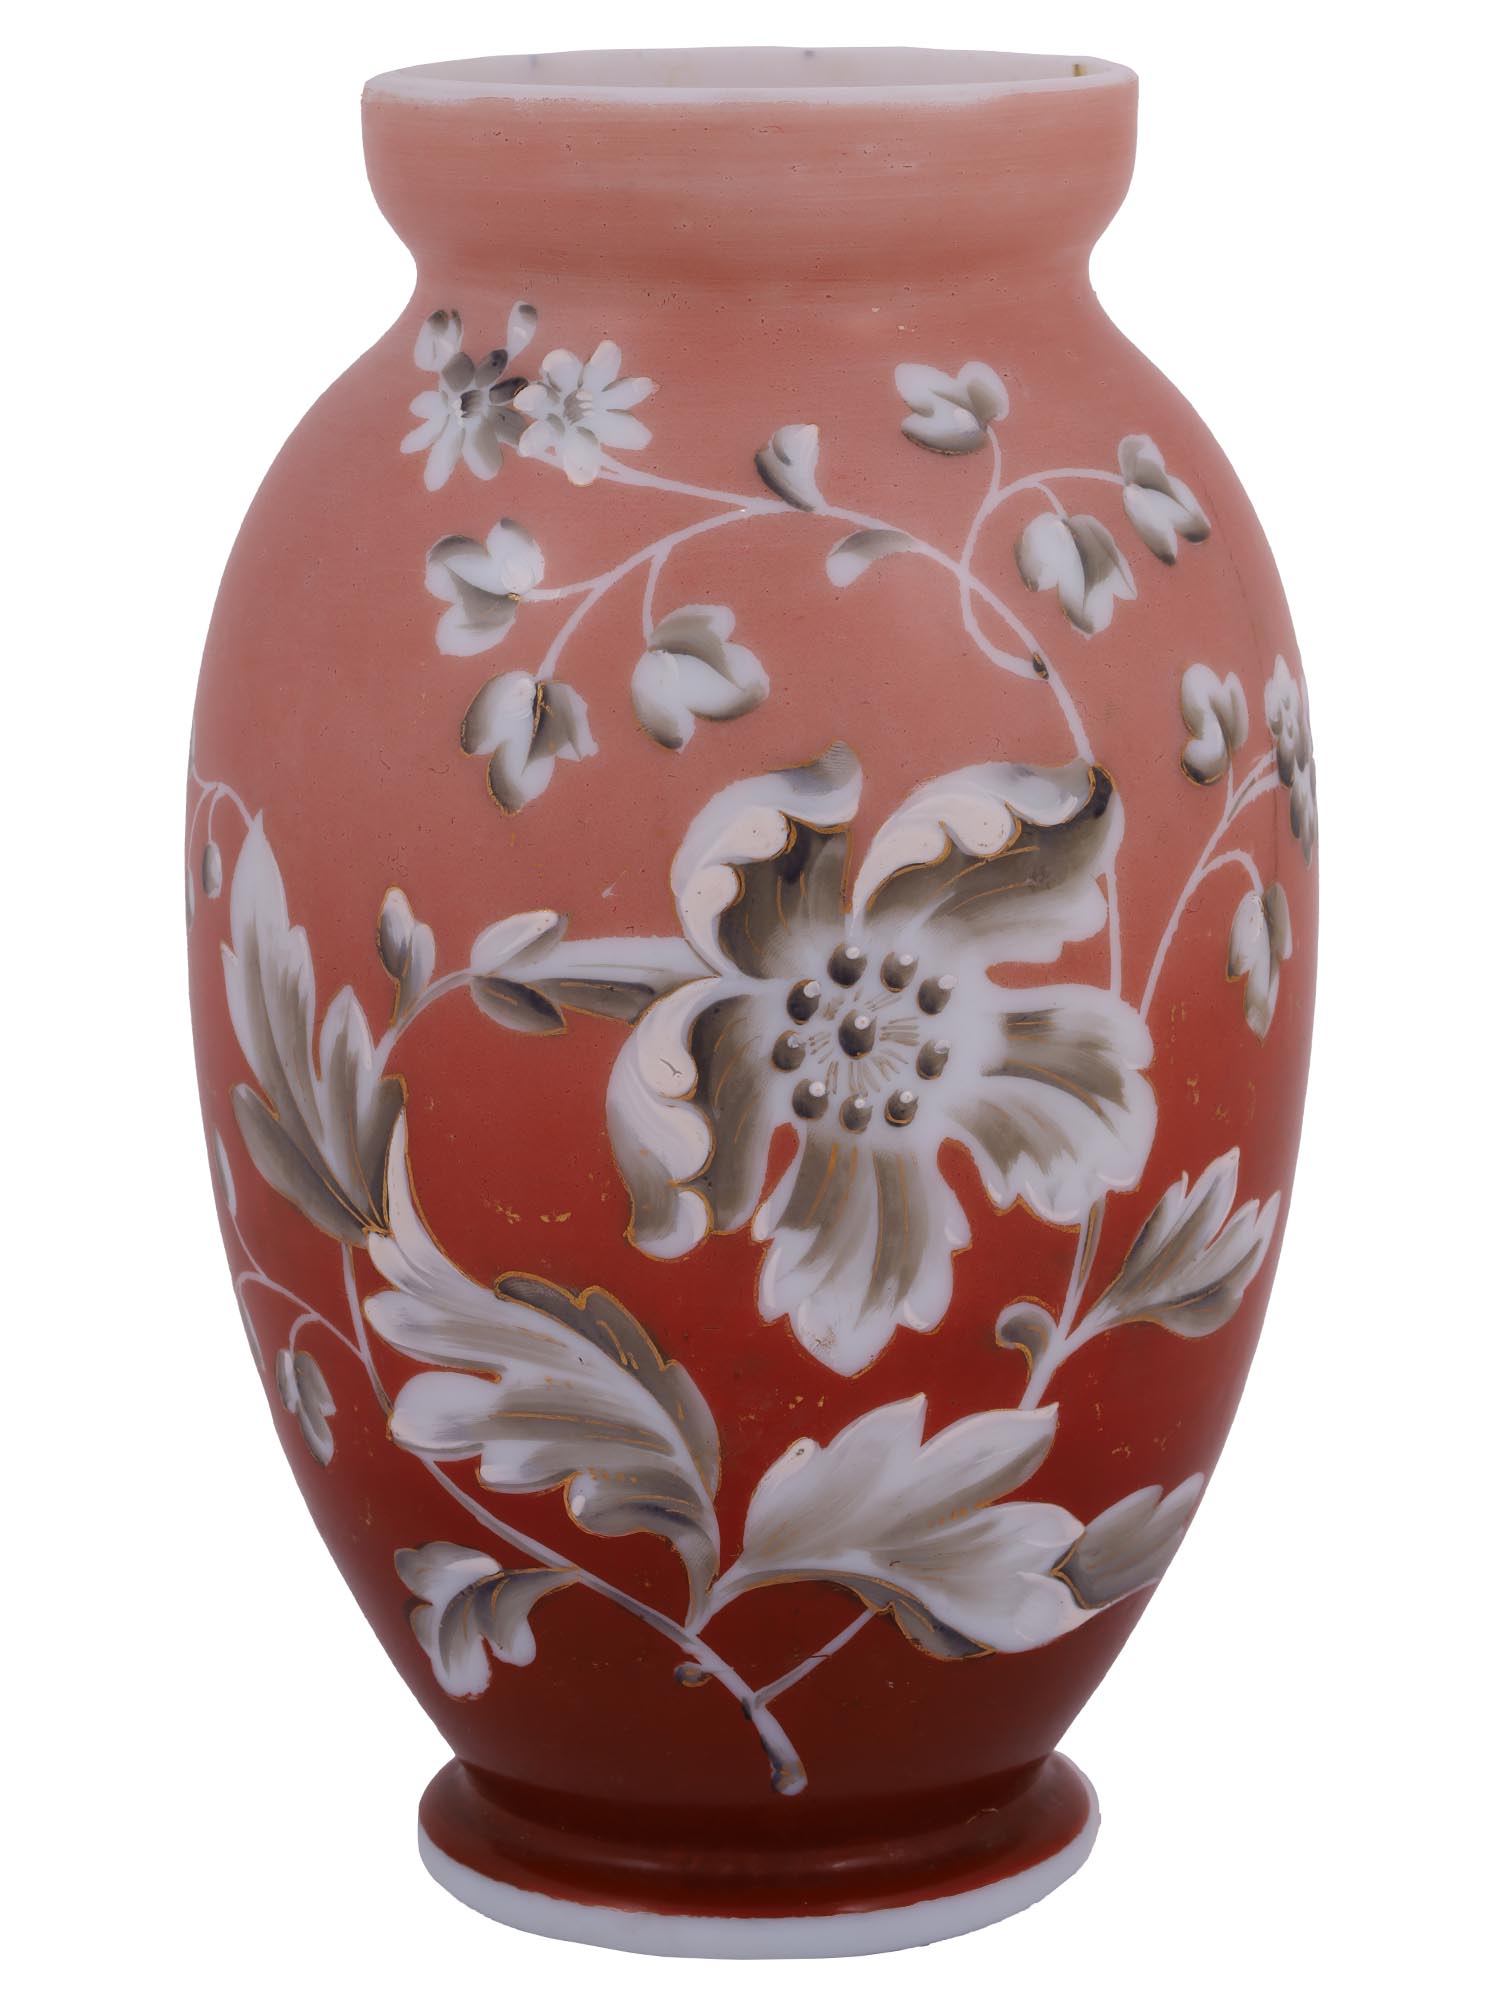 ANTIQUE FLORAL HAND PAINTED OPALINE GLASS VASE PIC-0